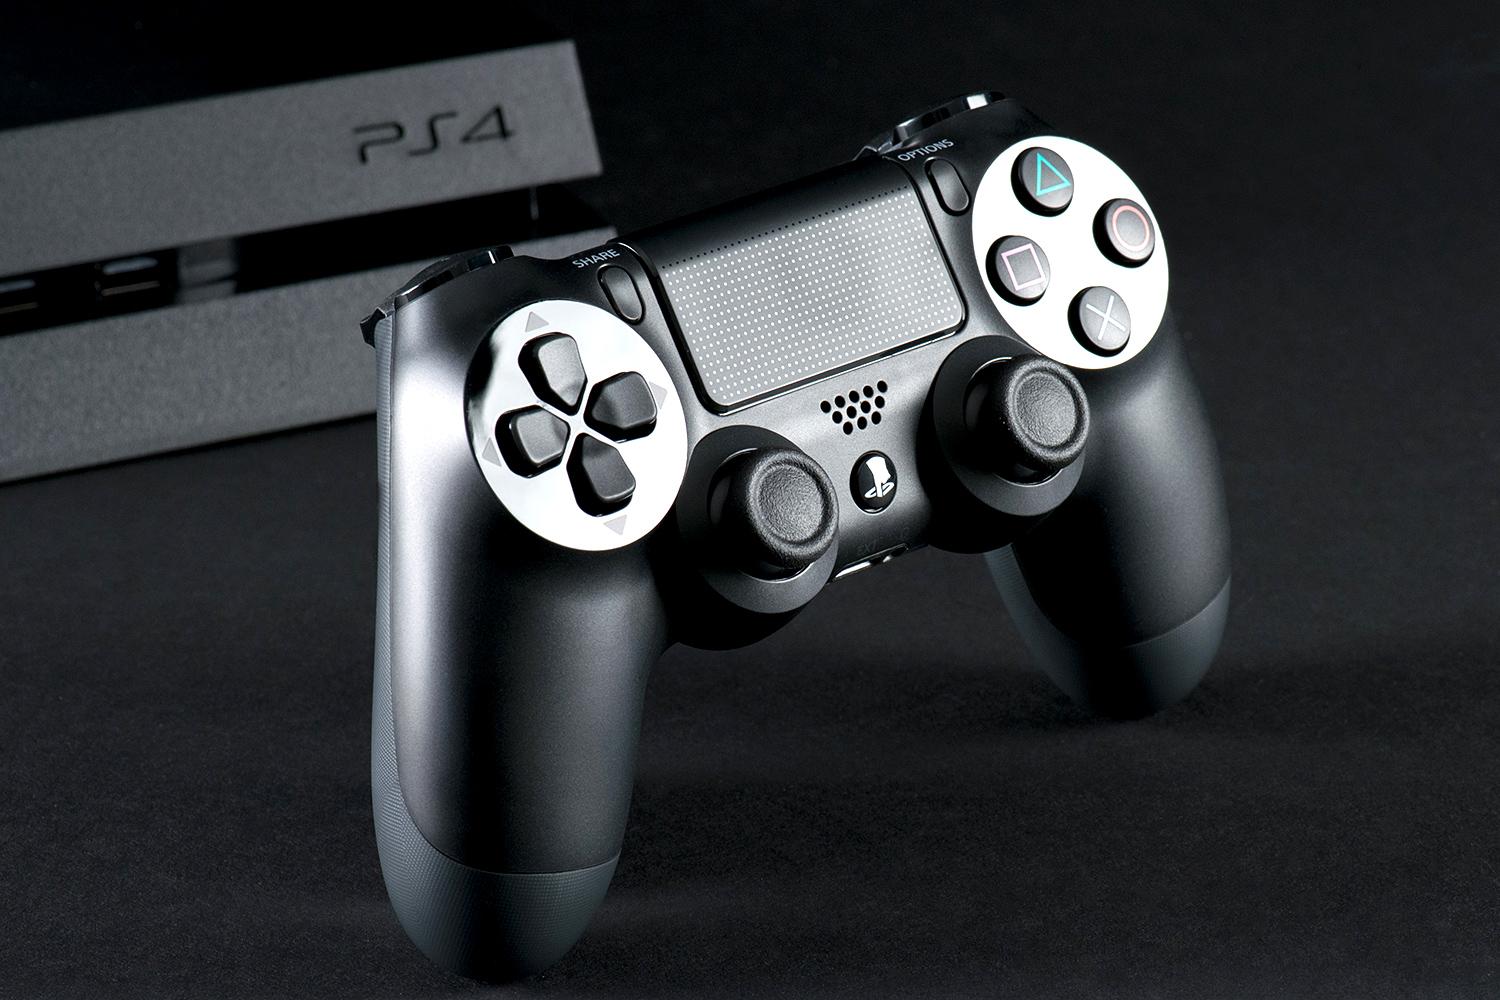 Total Playstation 4 Sales Topple 7 Million Worldwide